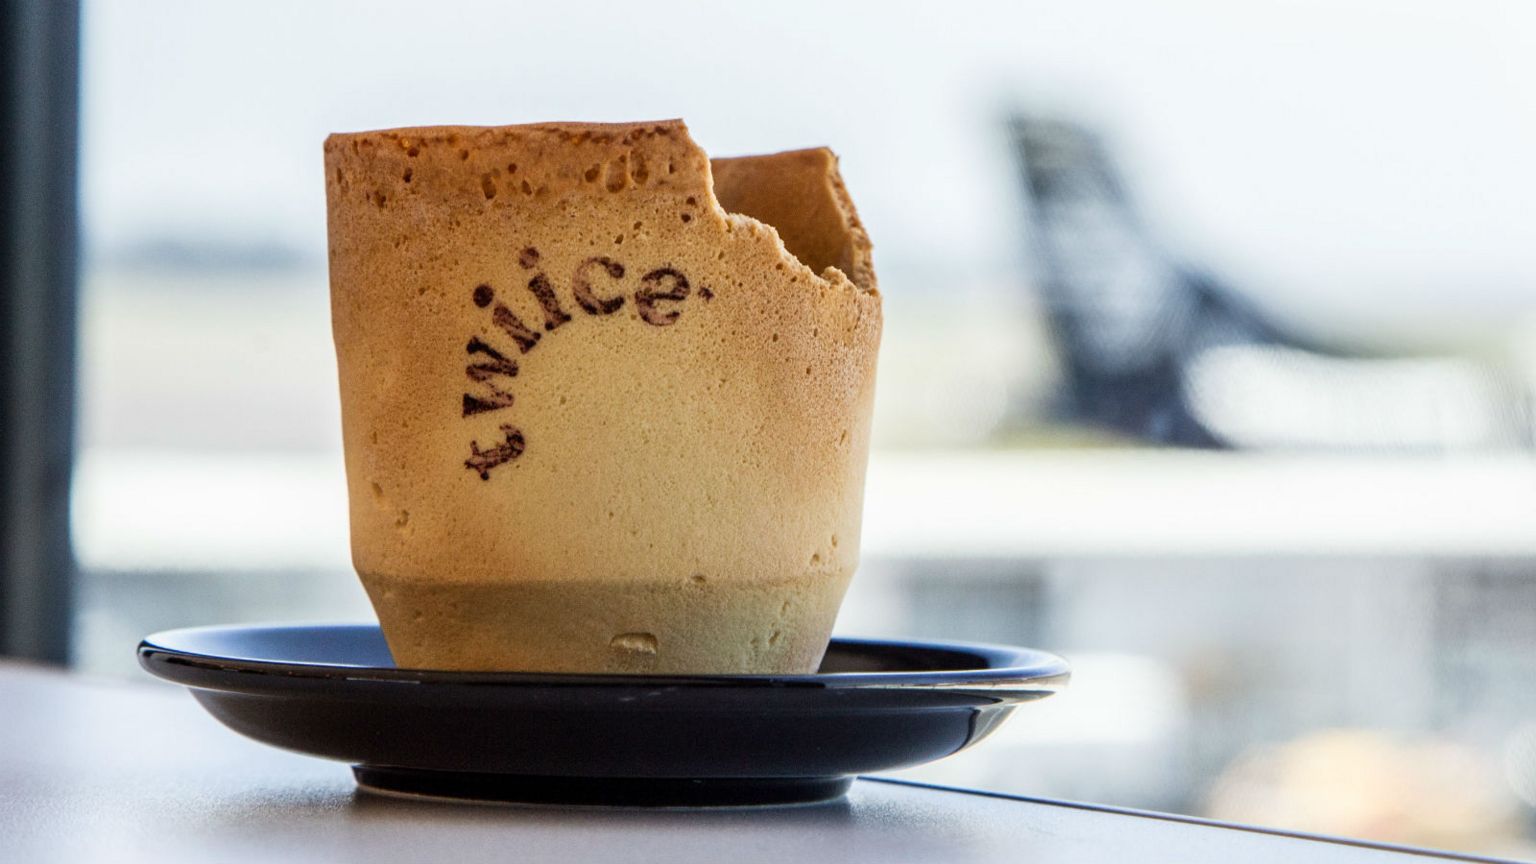 An edible coffee cup is pictured in a handout image from Air New Zealand